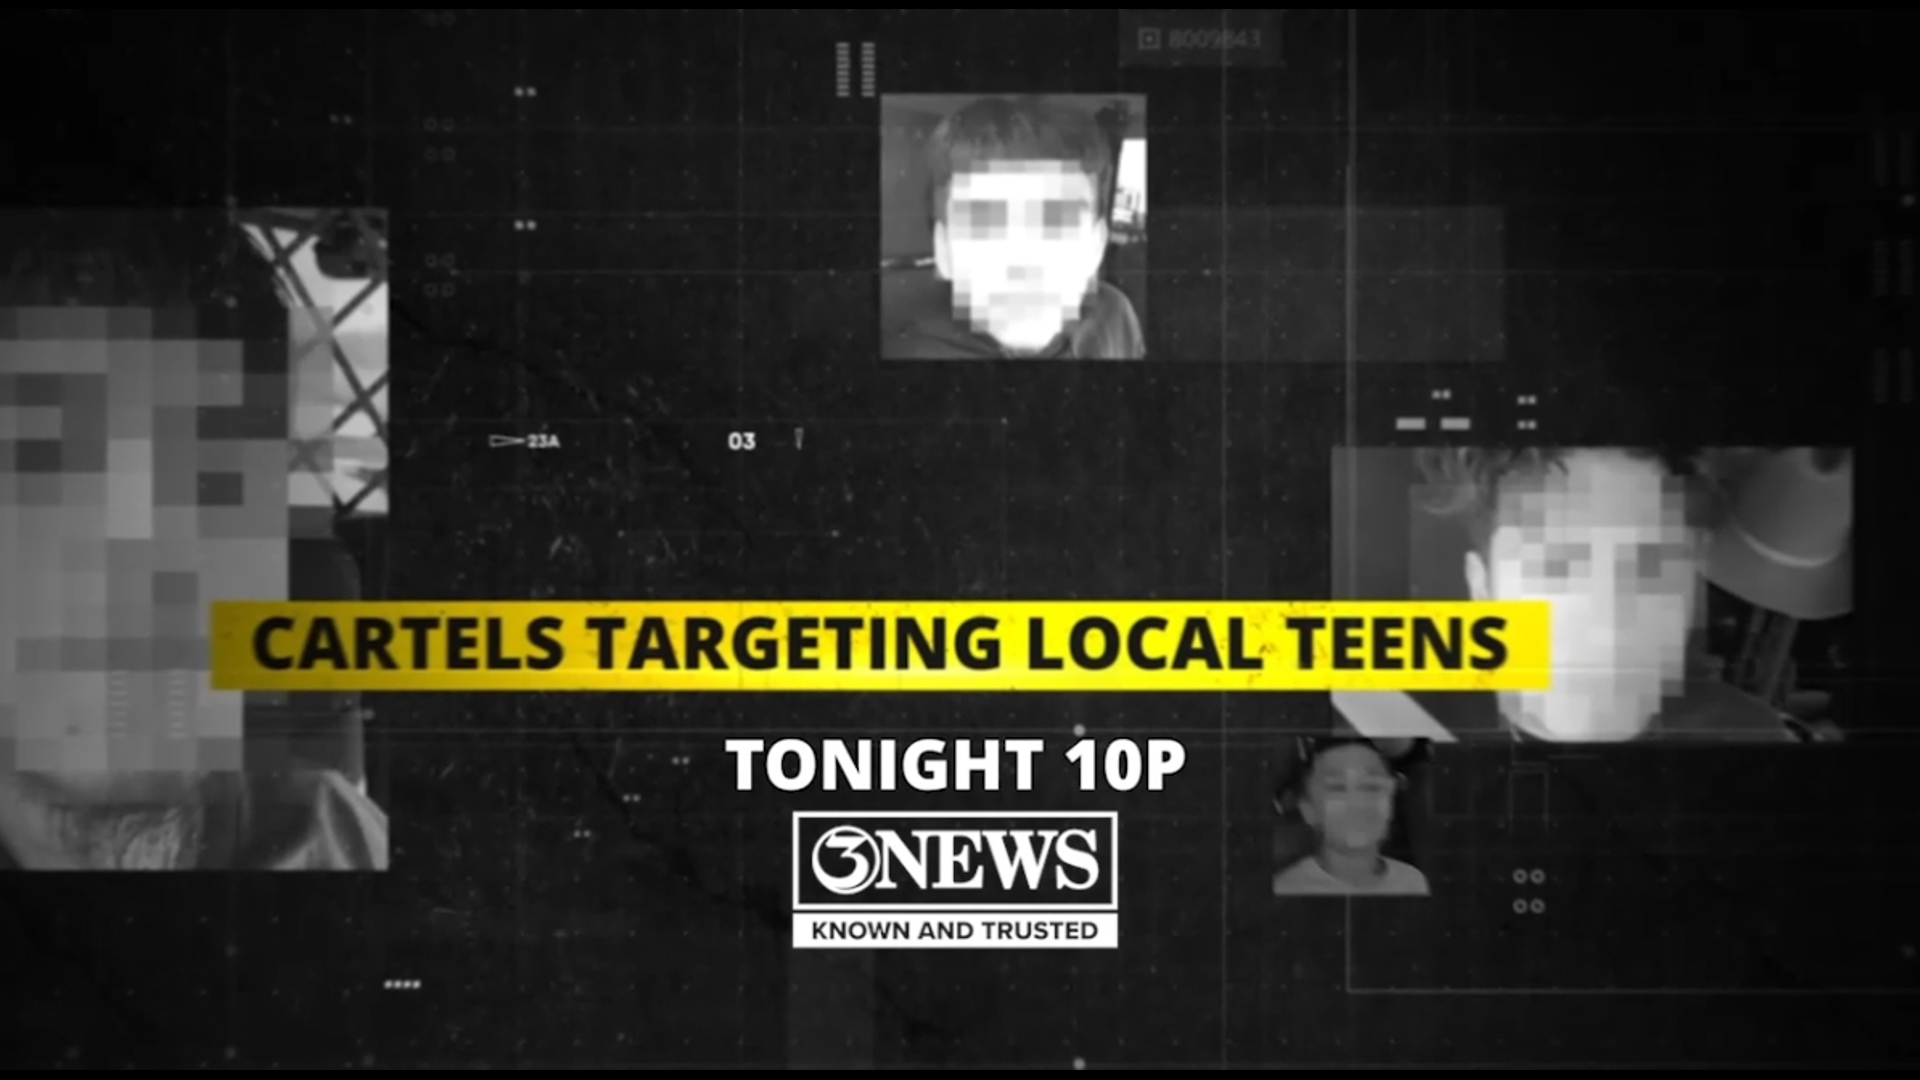 Monday night at 10 p.m. on #3NEWS: Local teens colliding with police and Mexican cartels. How this online scheme might be targeting your kids.